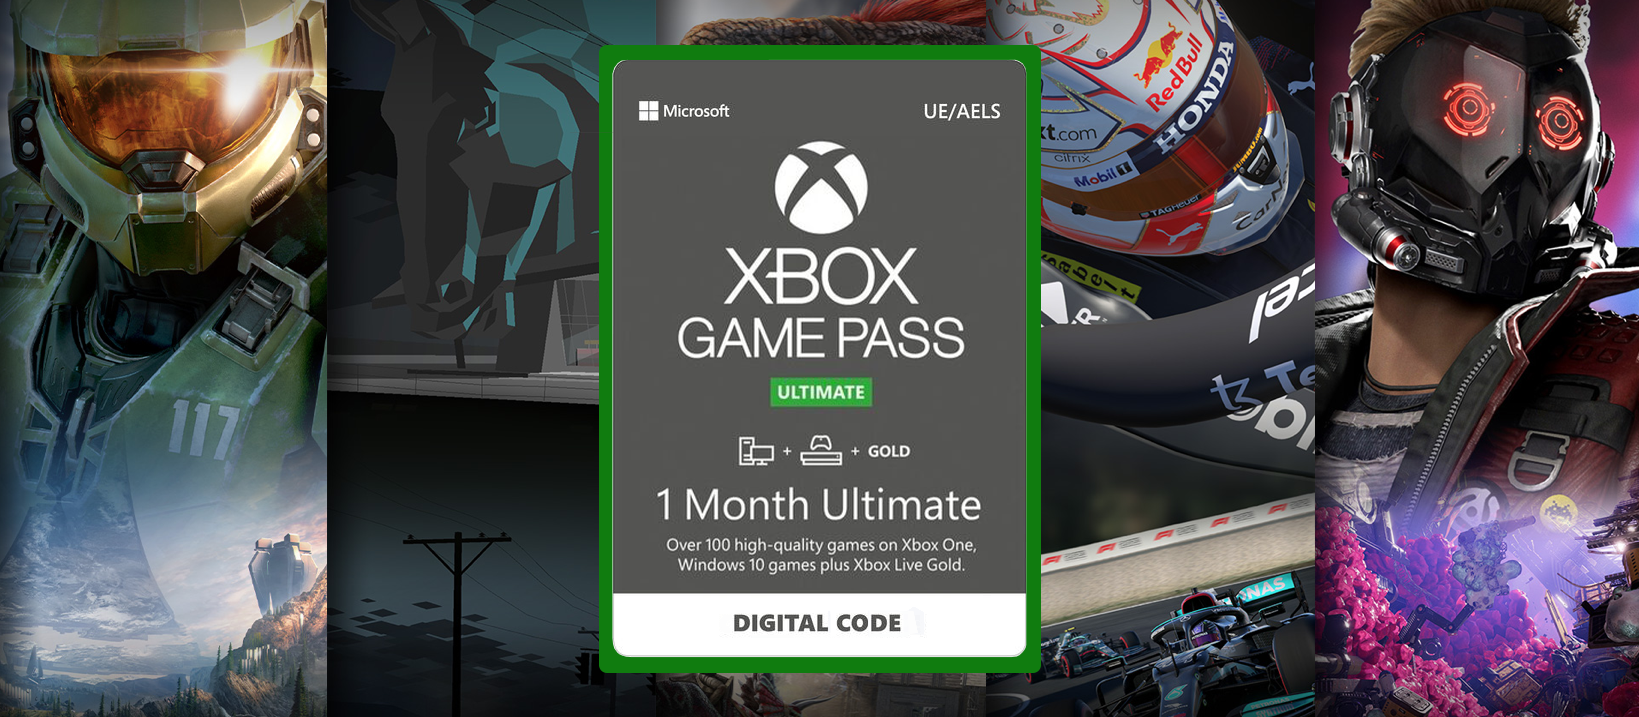 Xbox Game Pass Ultimate launches with PC and console games